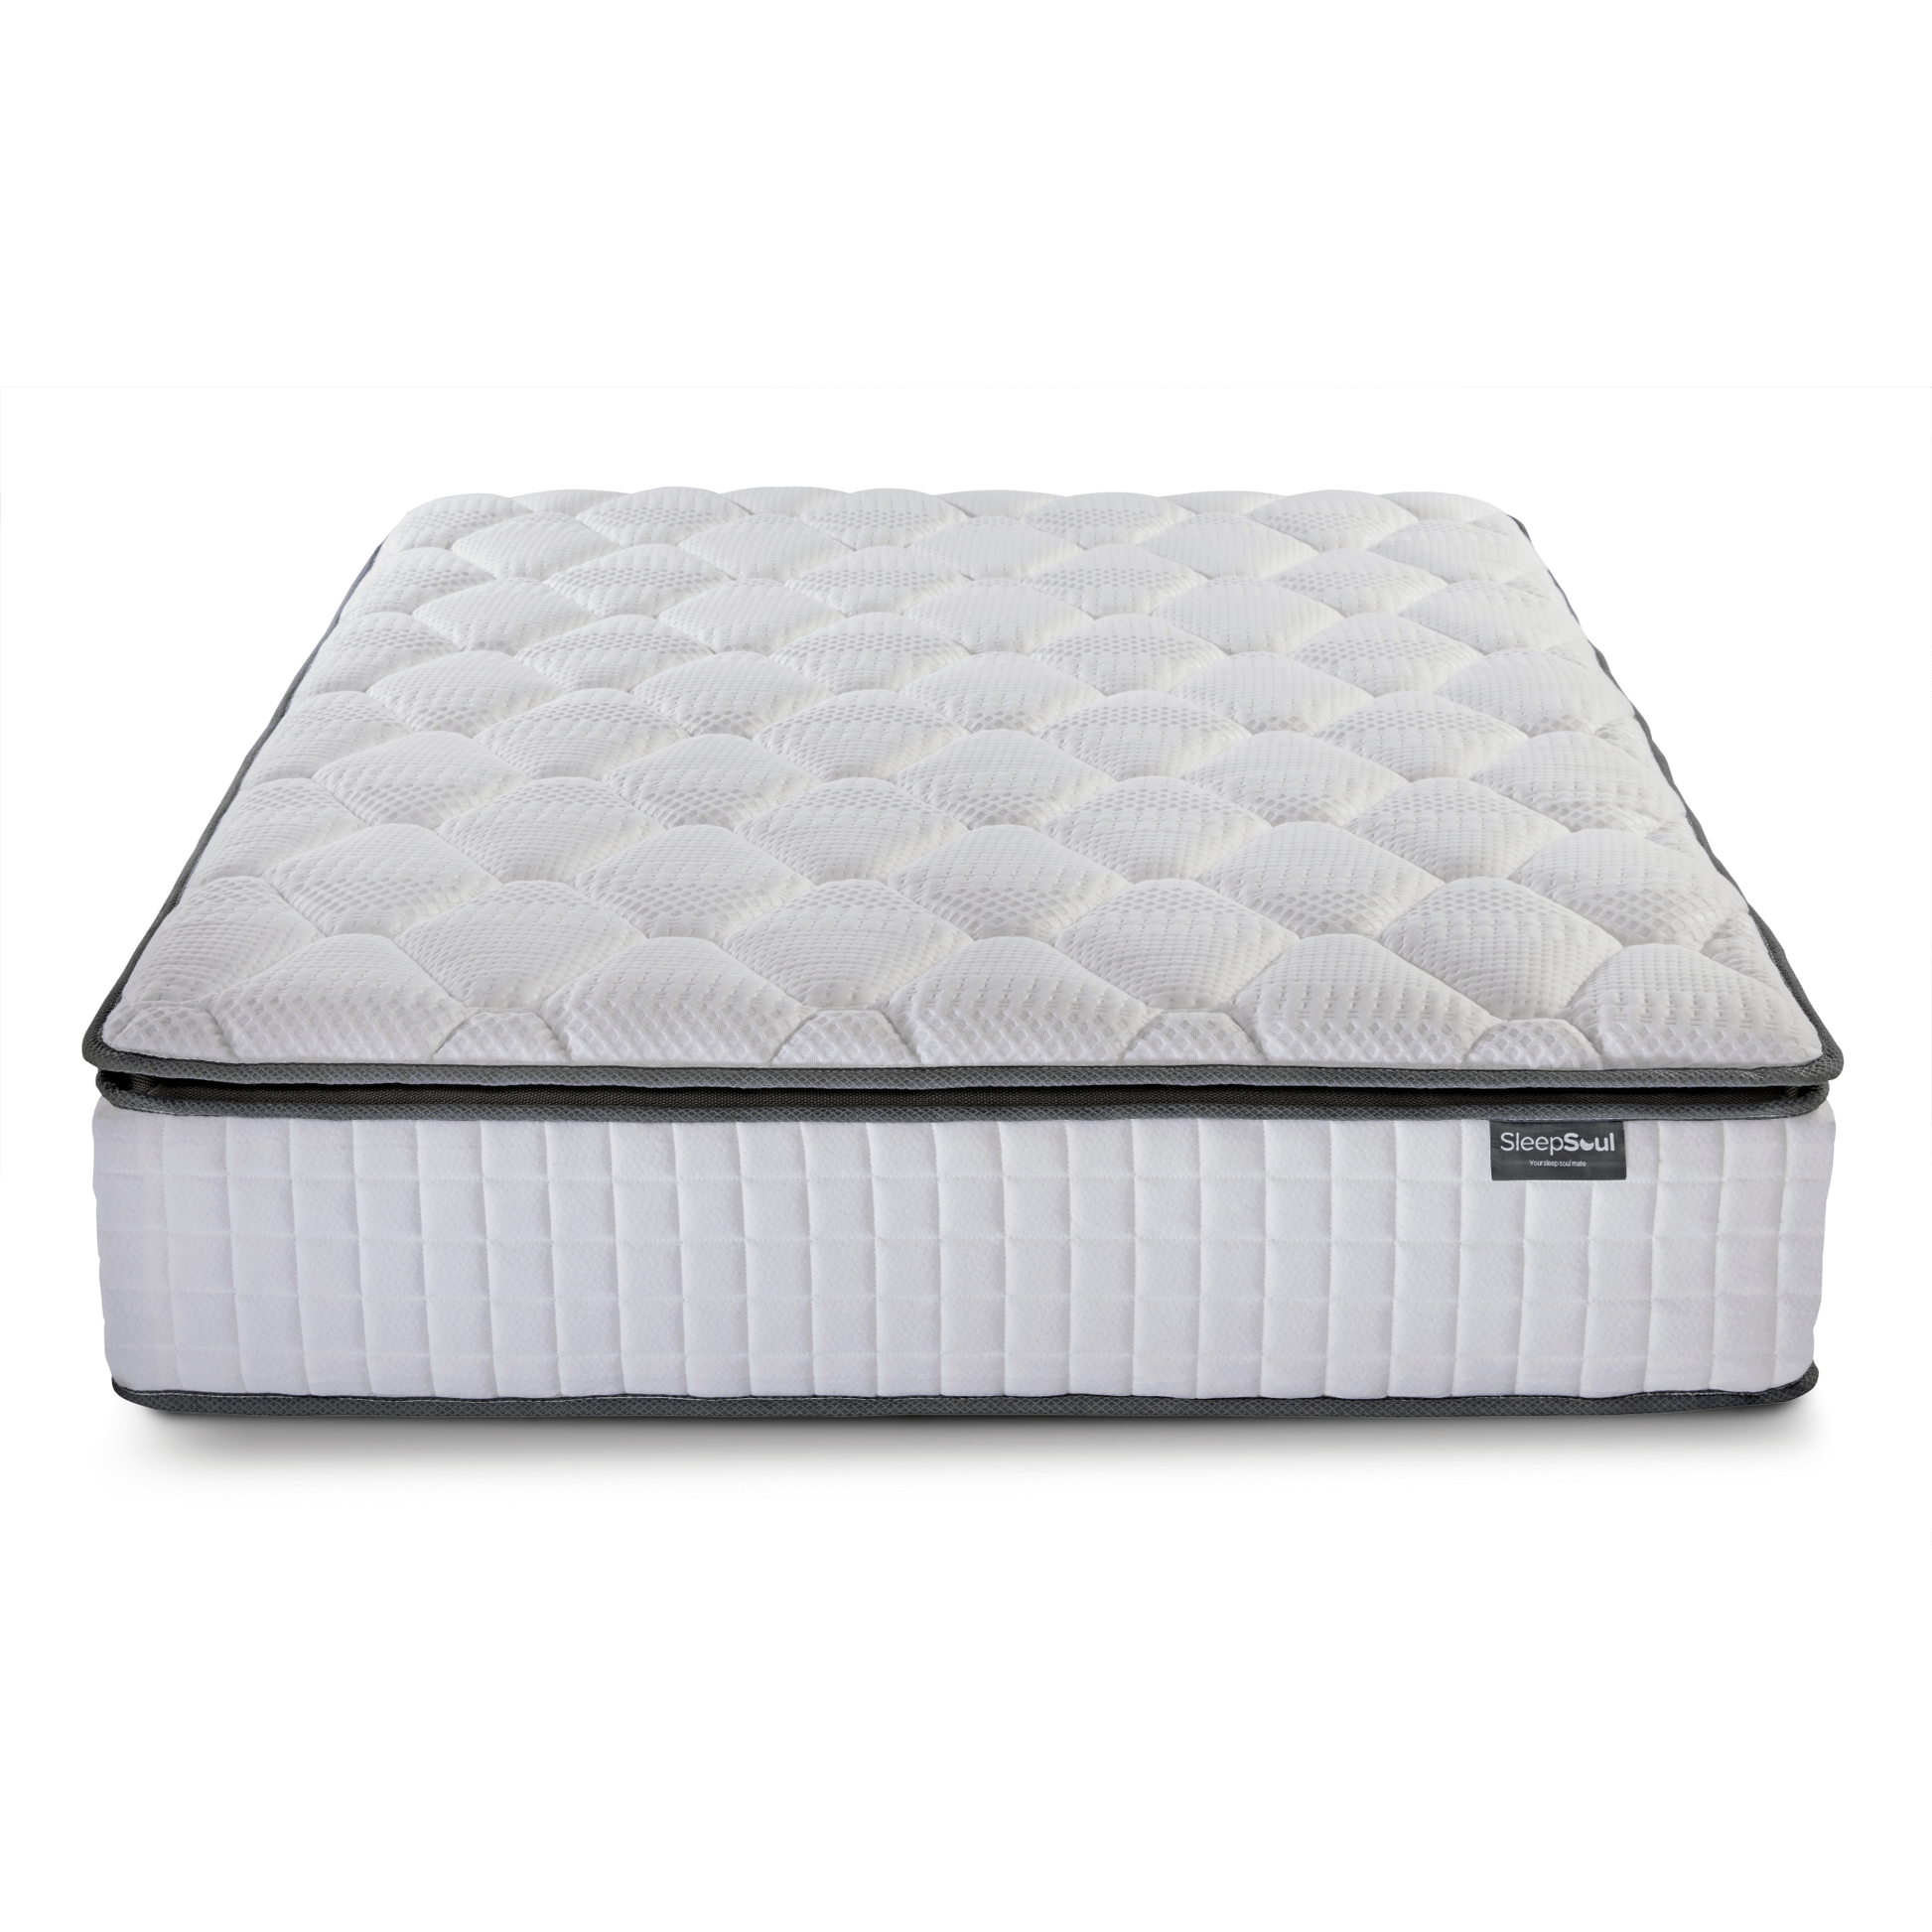 SleepSoul bliss 800 pocket spring and memory foam pillow top small double mattress full